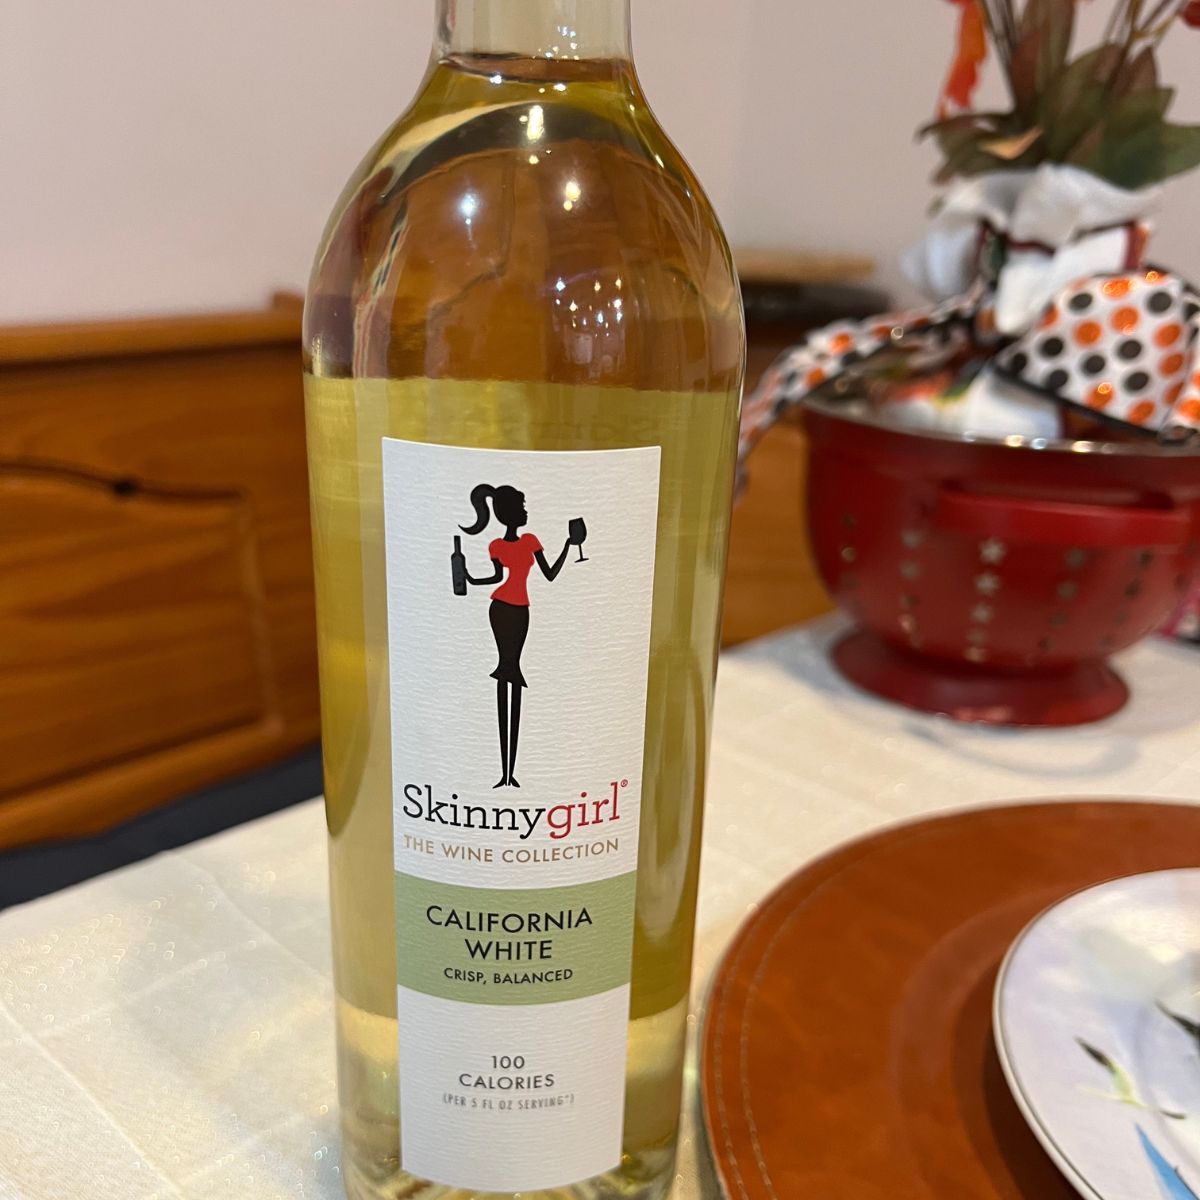 A bottle of Skinnygirl wine on a table